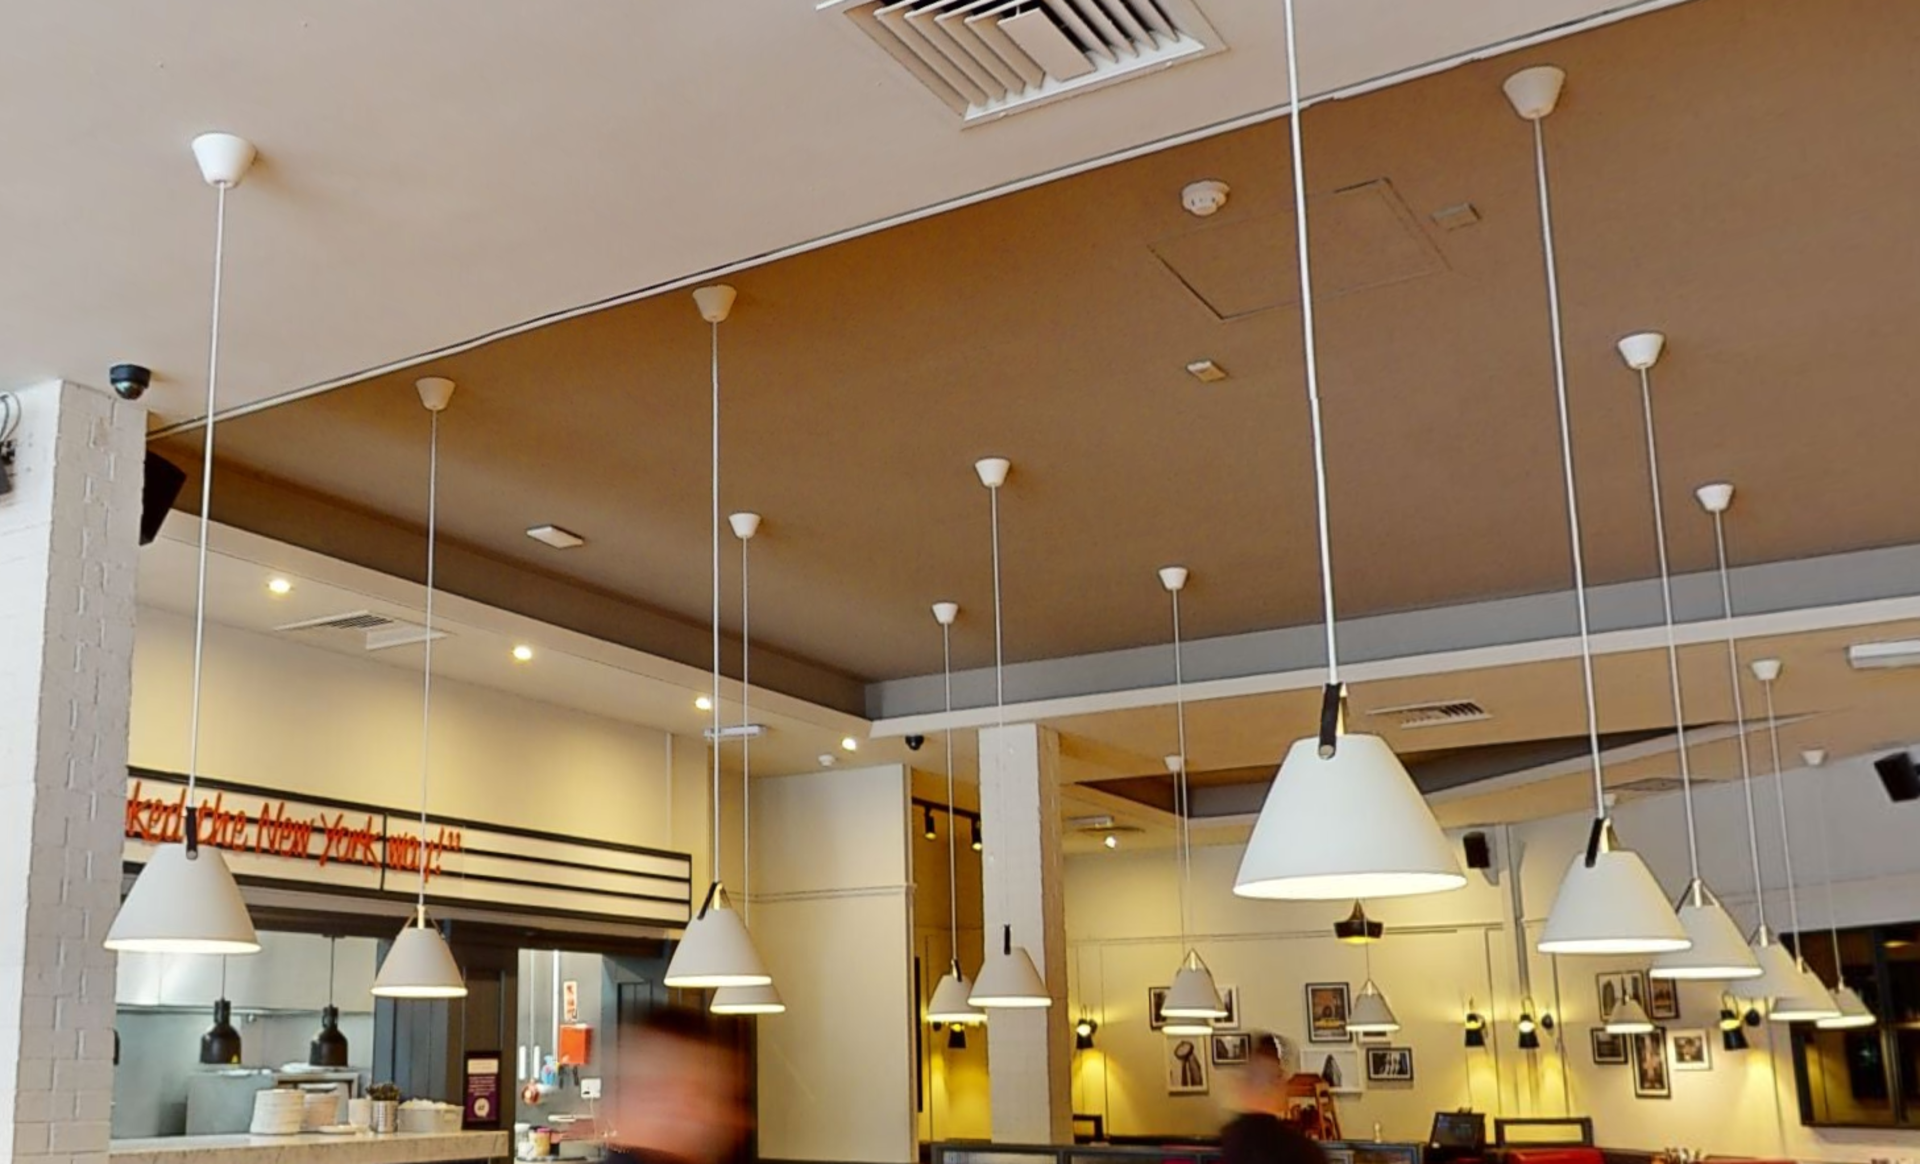 6 x Suspending Ceiling Pendant Lights Featuring Beige Metal Shades With Brown Leather Straps - Image 3 of 6